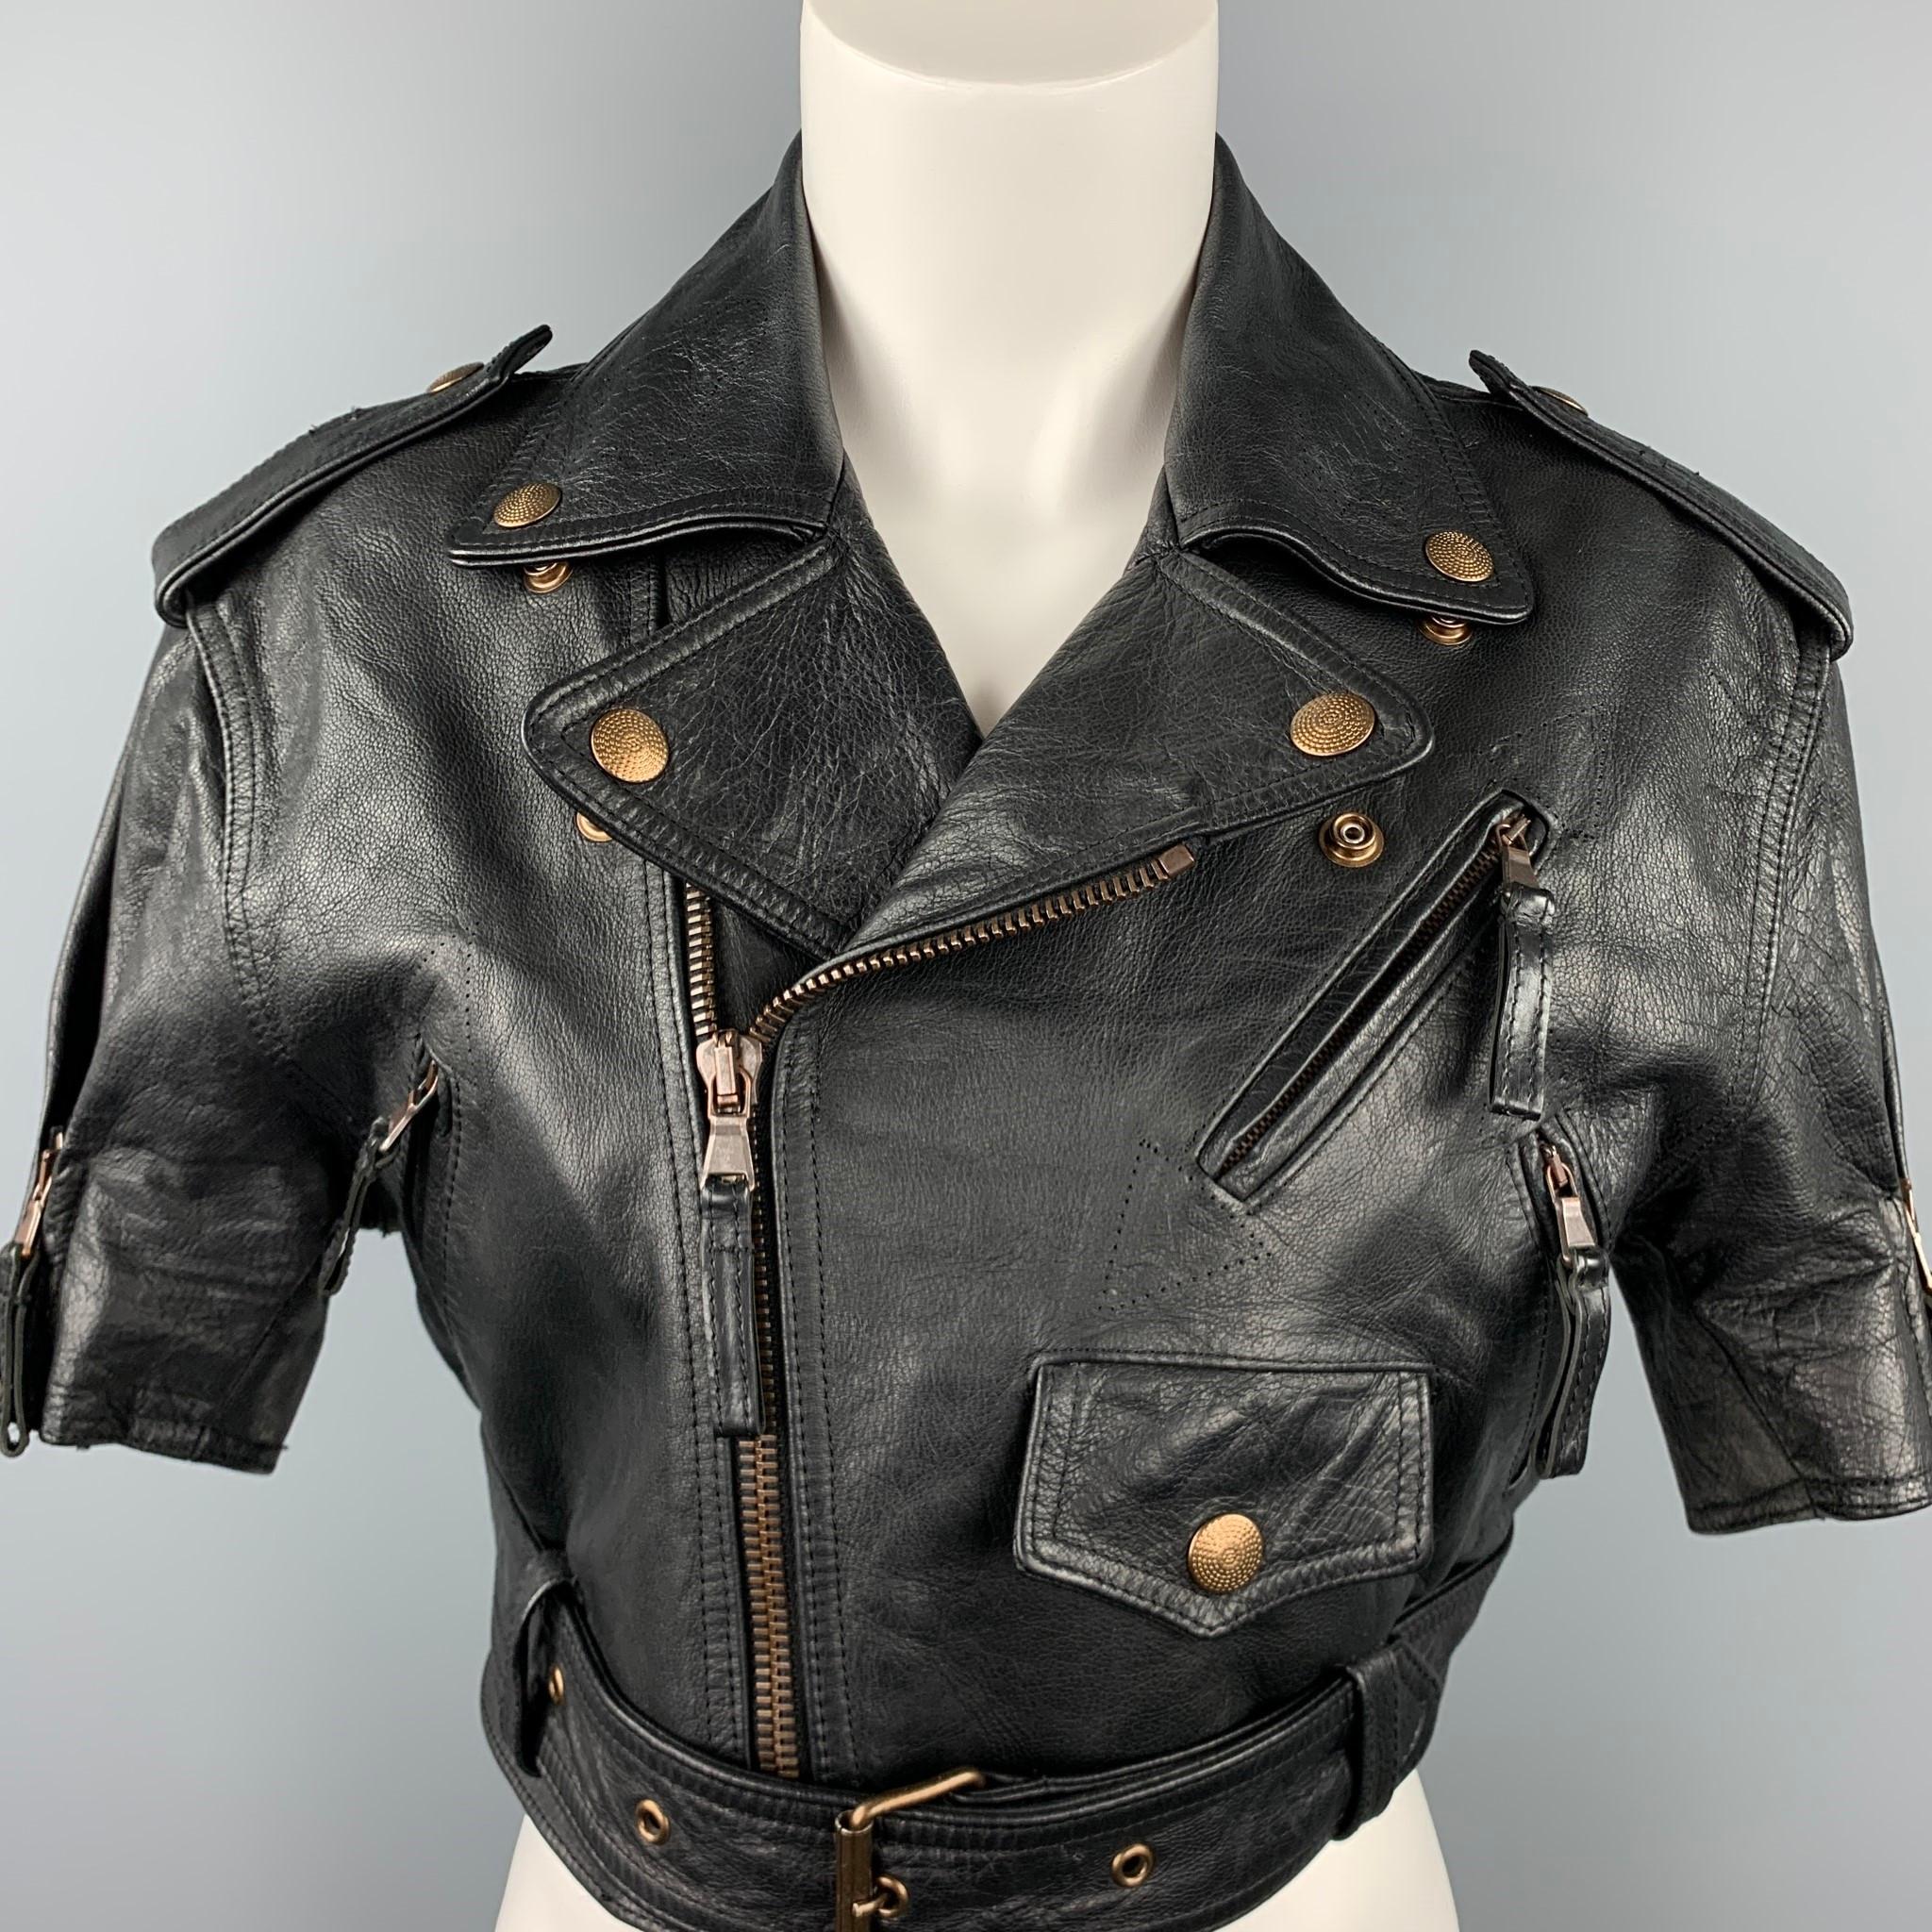 GAULTIER2 by JEAN PAUL GAULTIER jacket comes in a black leather with a full liner featuring a motorcycle style, zipper pockets, belt detail, epaulettes, and a zip up closure. Made in Italy. 

Very Good Pre-Owned Condition.
Marked: I 42 / D 38 / F 38